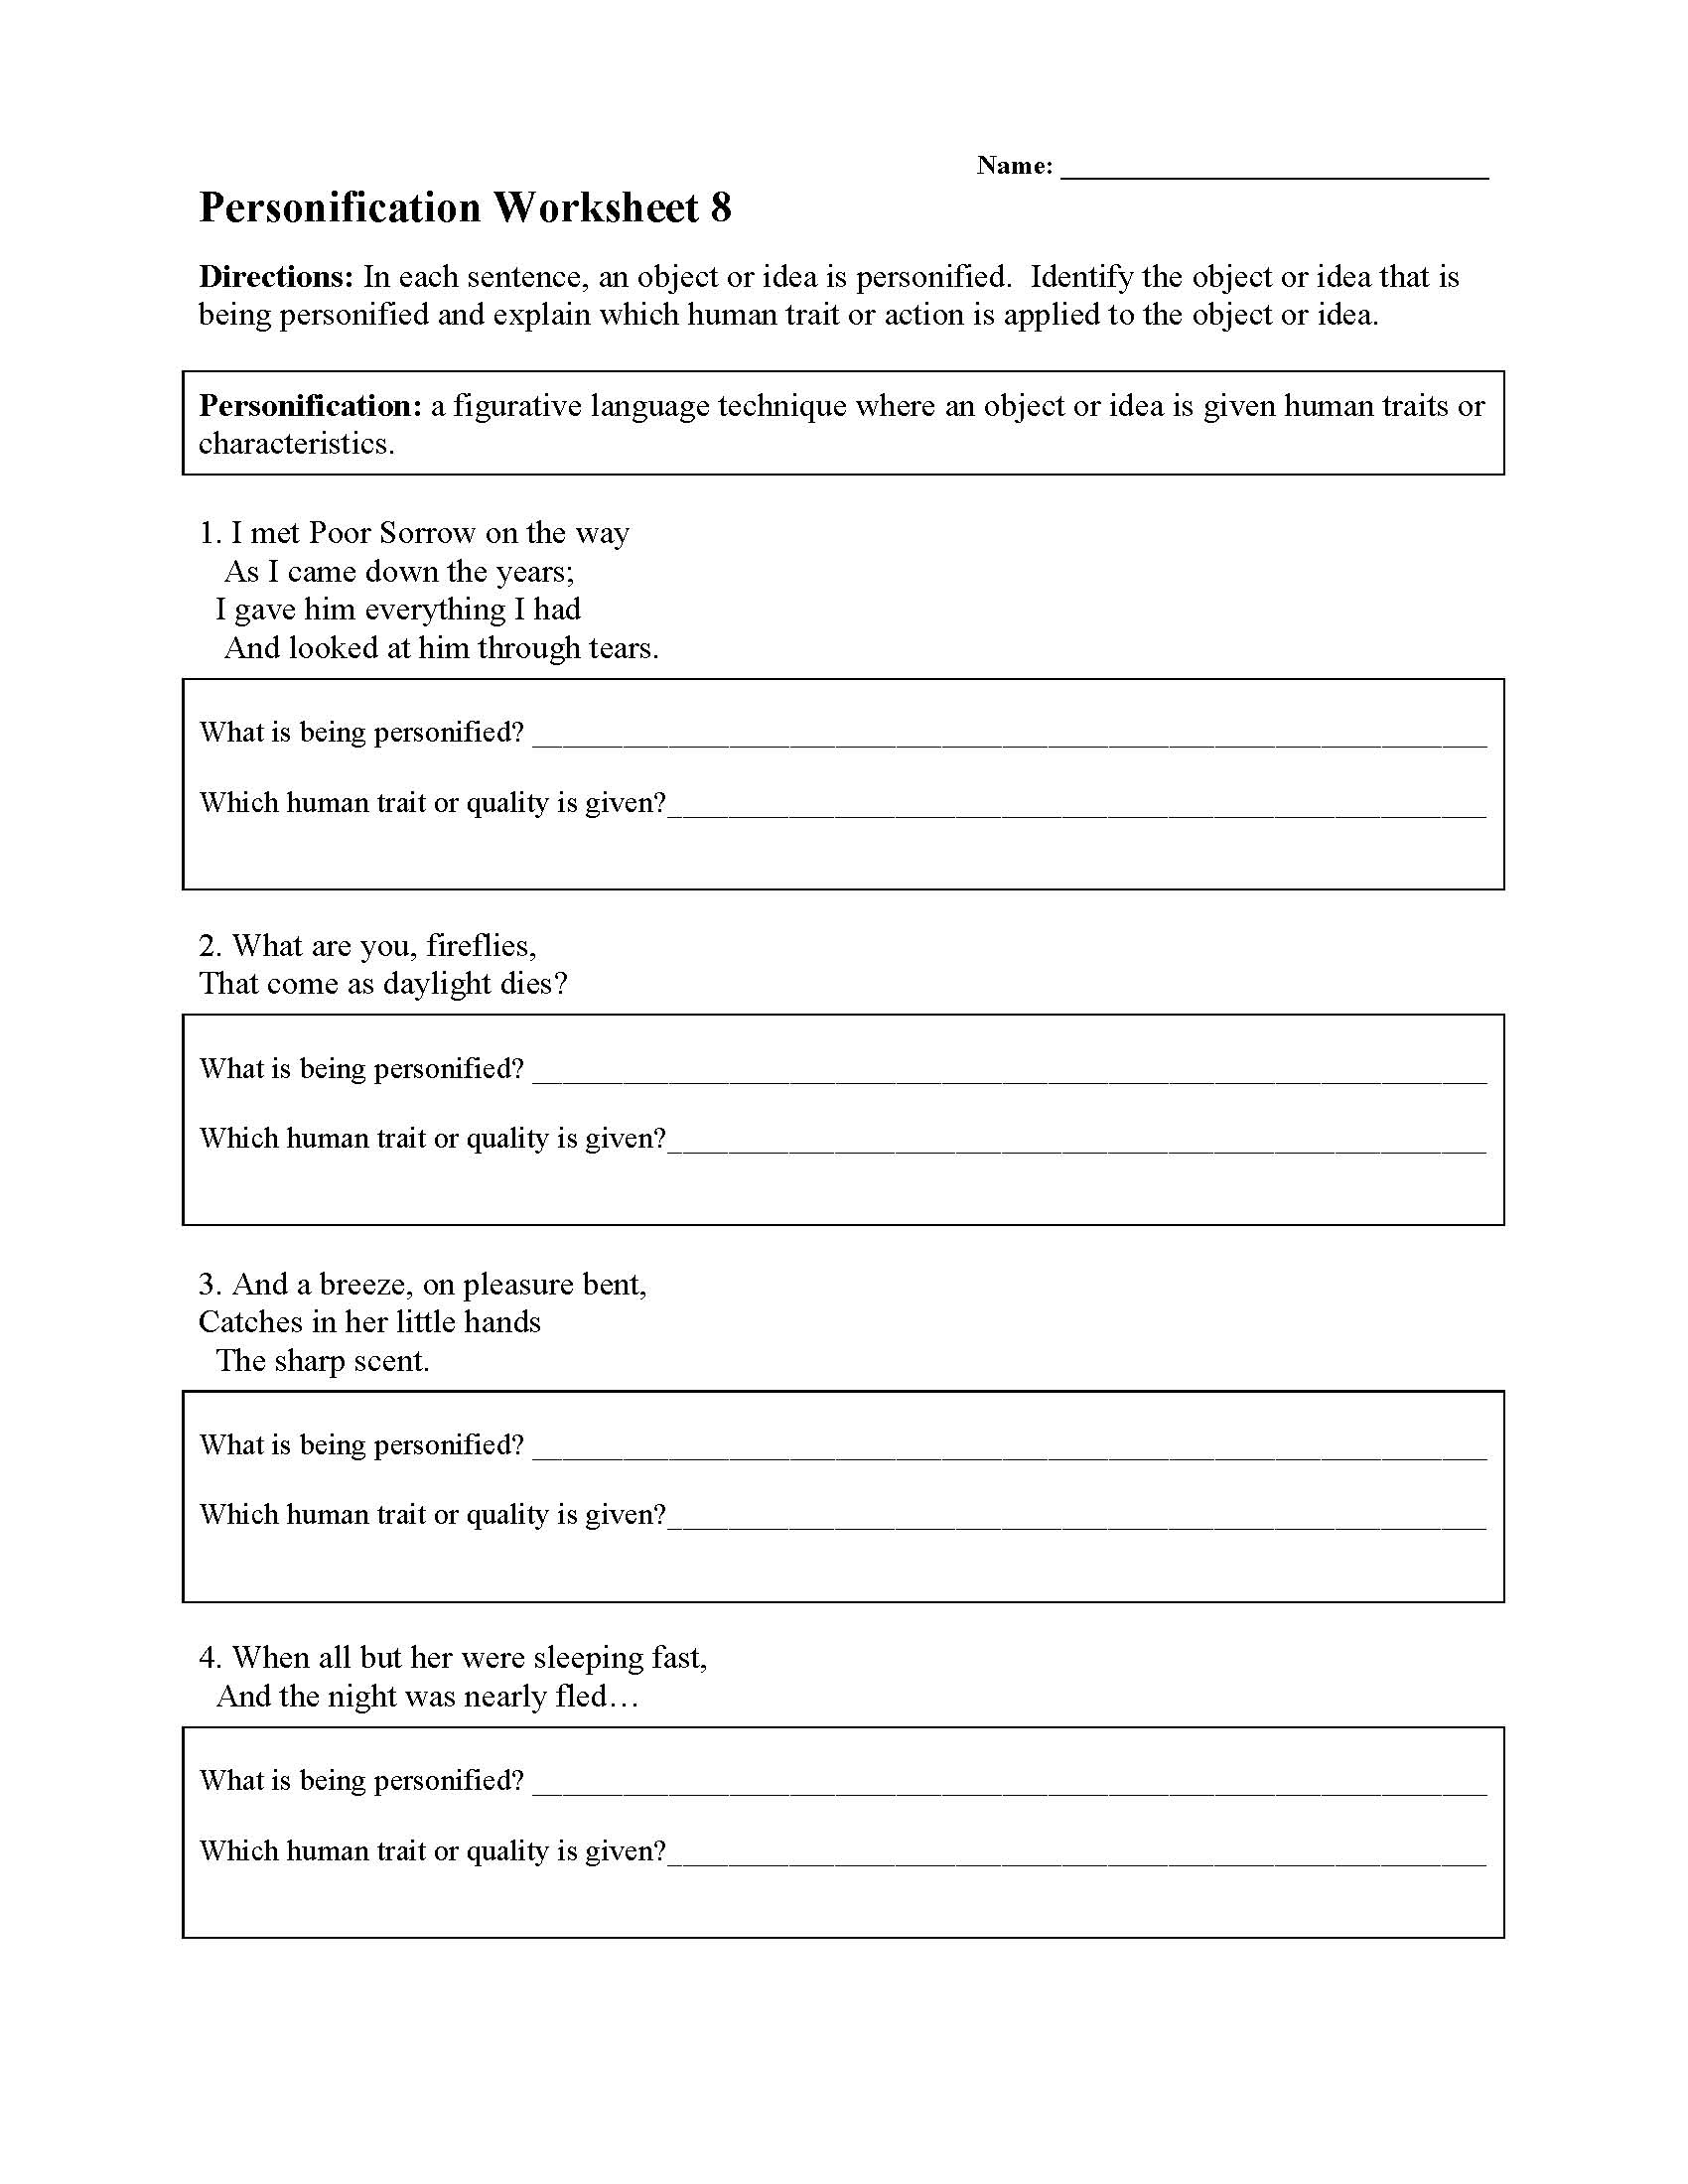 personification-worksheets-grade-5